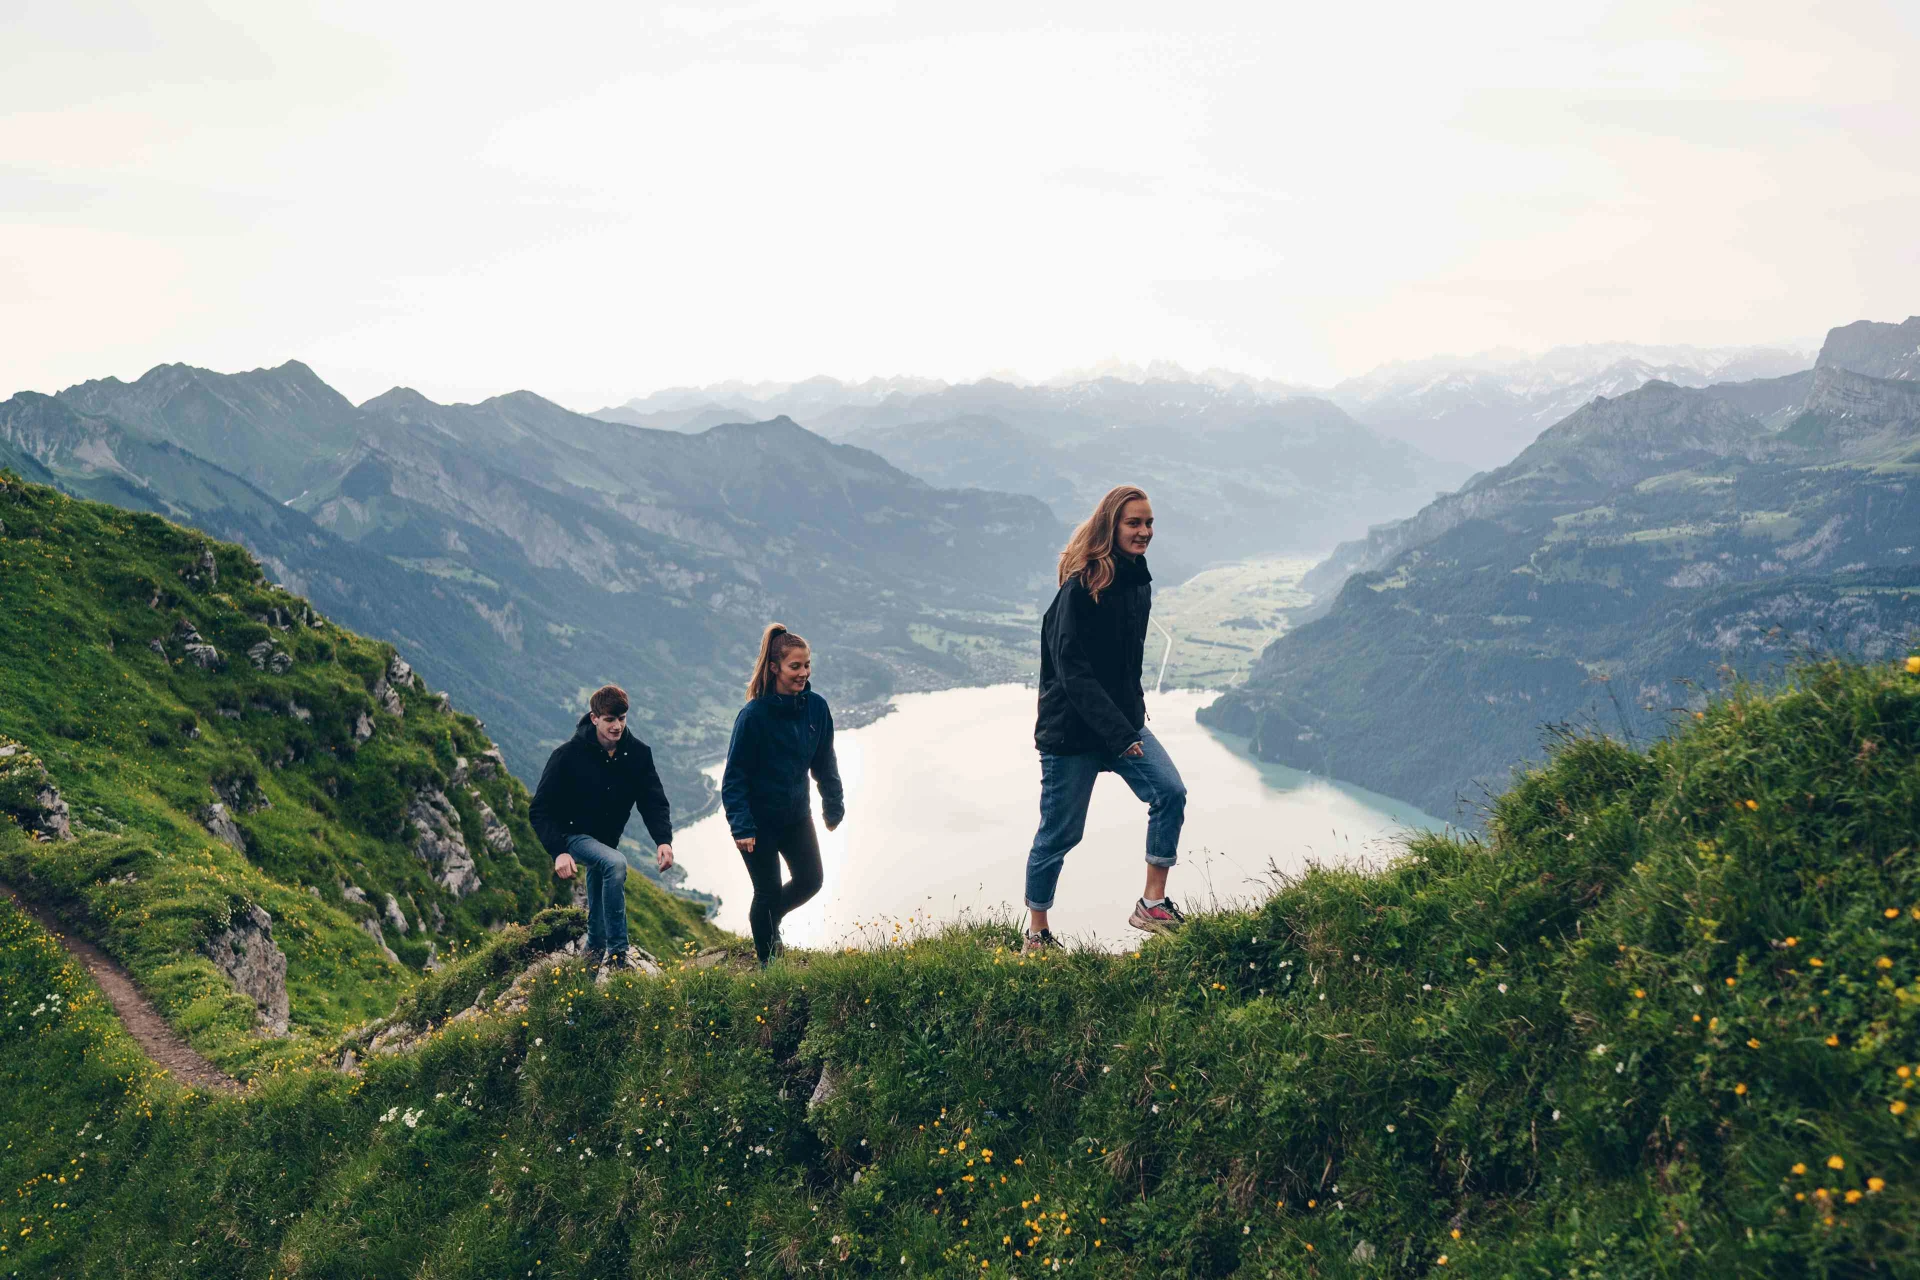 Three people hiking on a ridge, a mountain lake in the background.